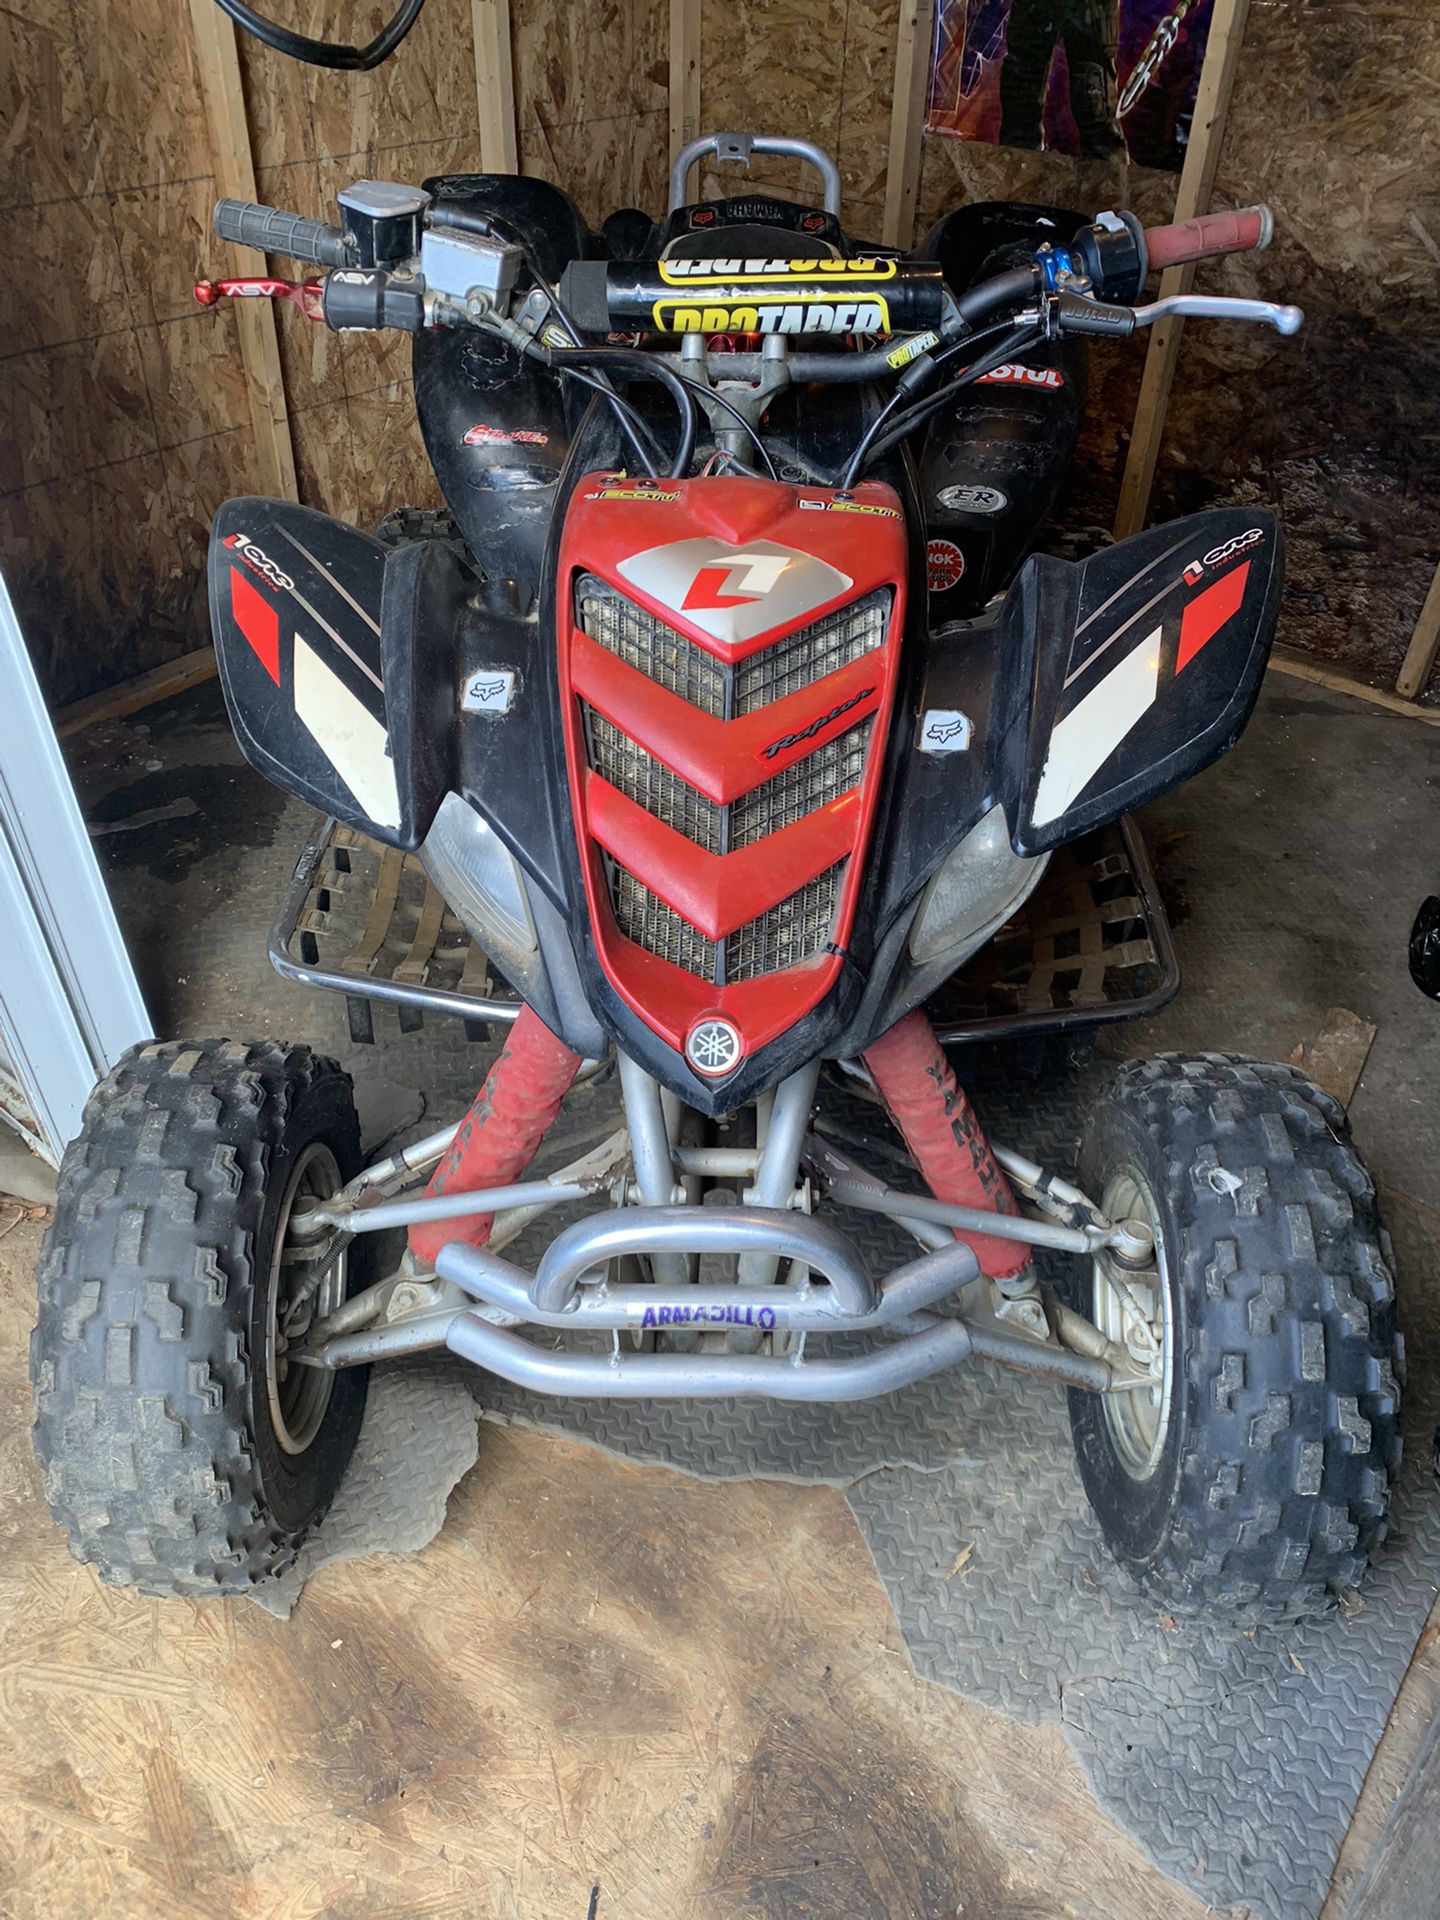 2005 Yamaha Raptor 660 bored out to 686 with HMF pipes